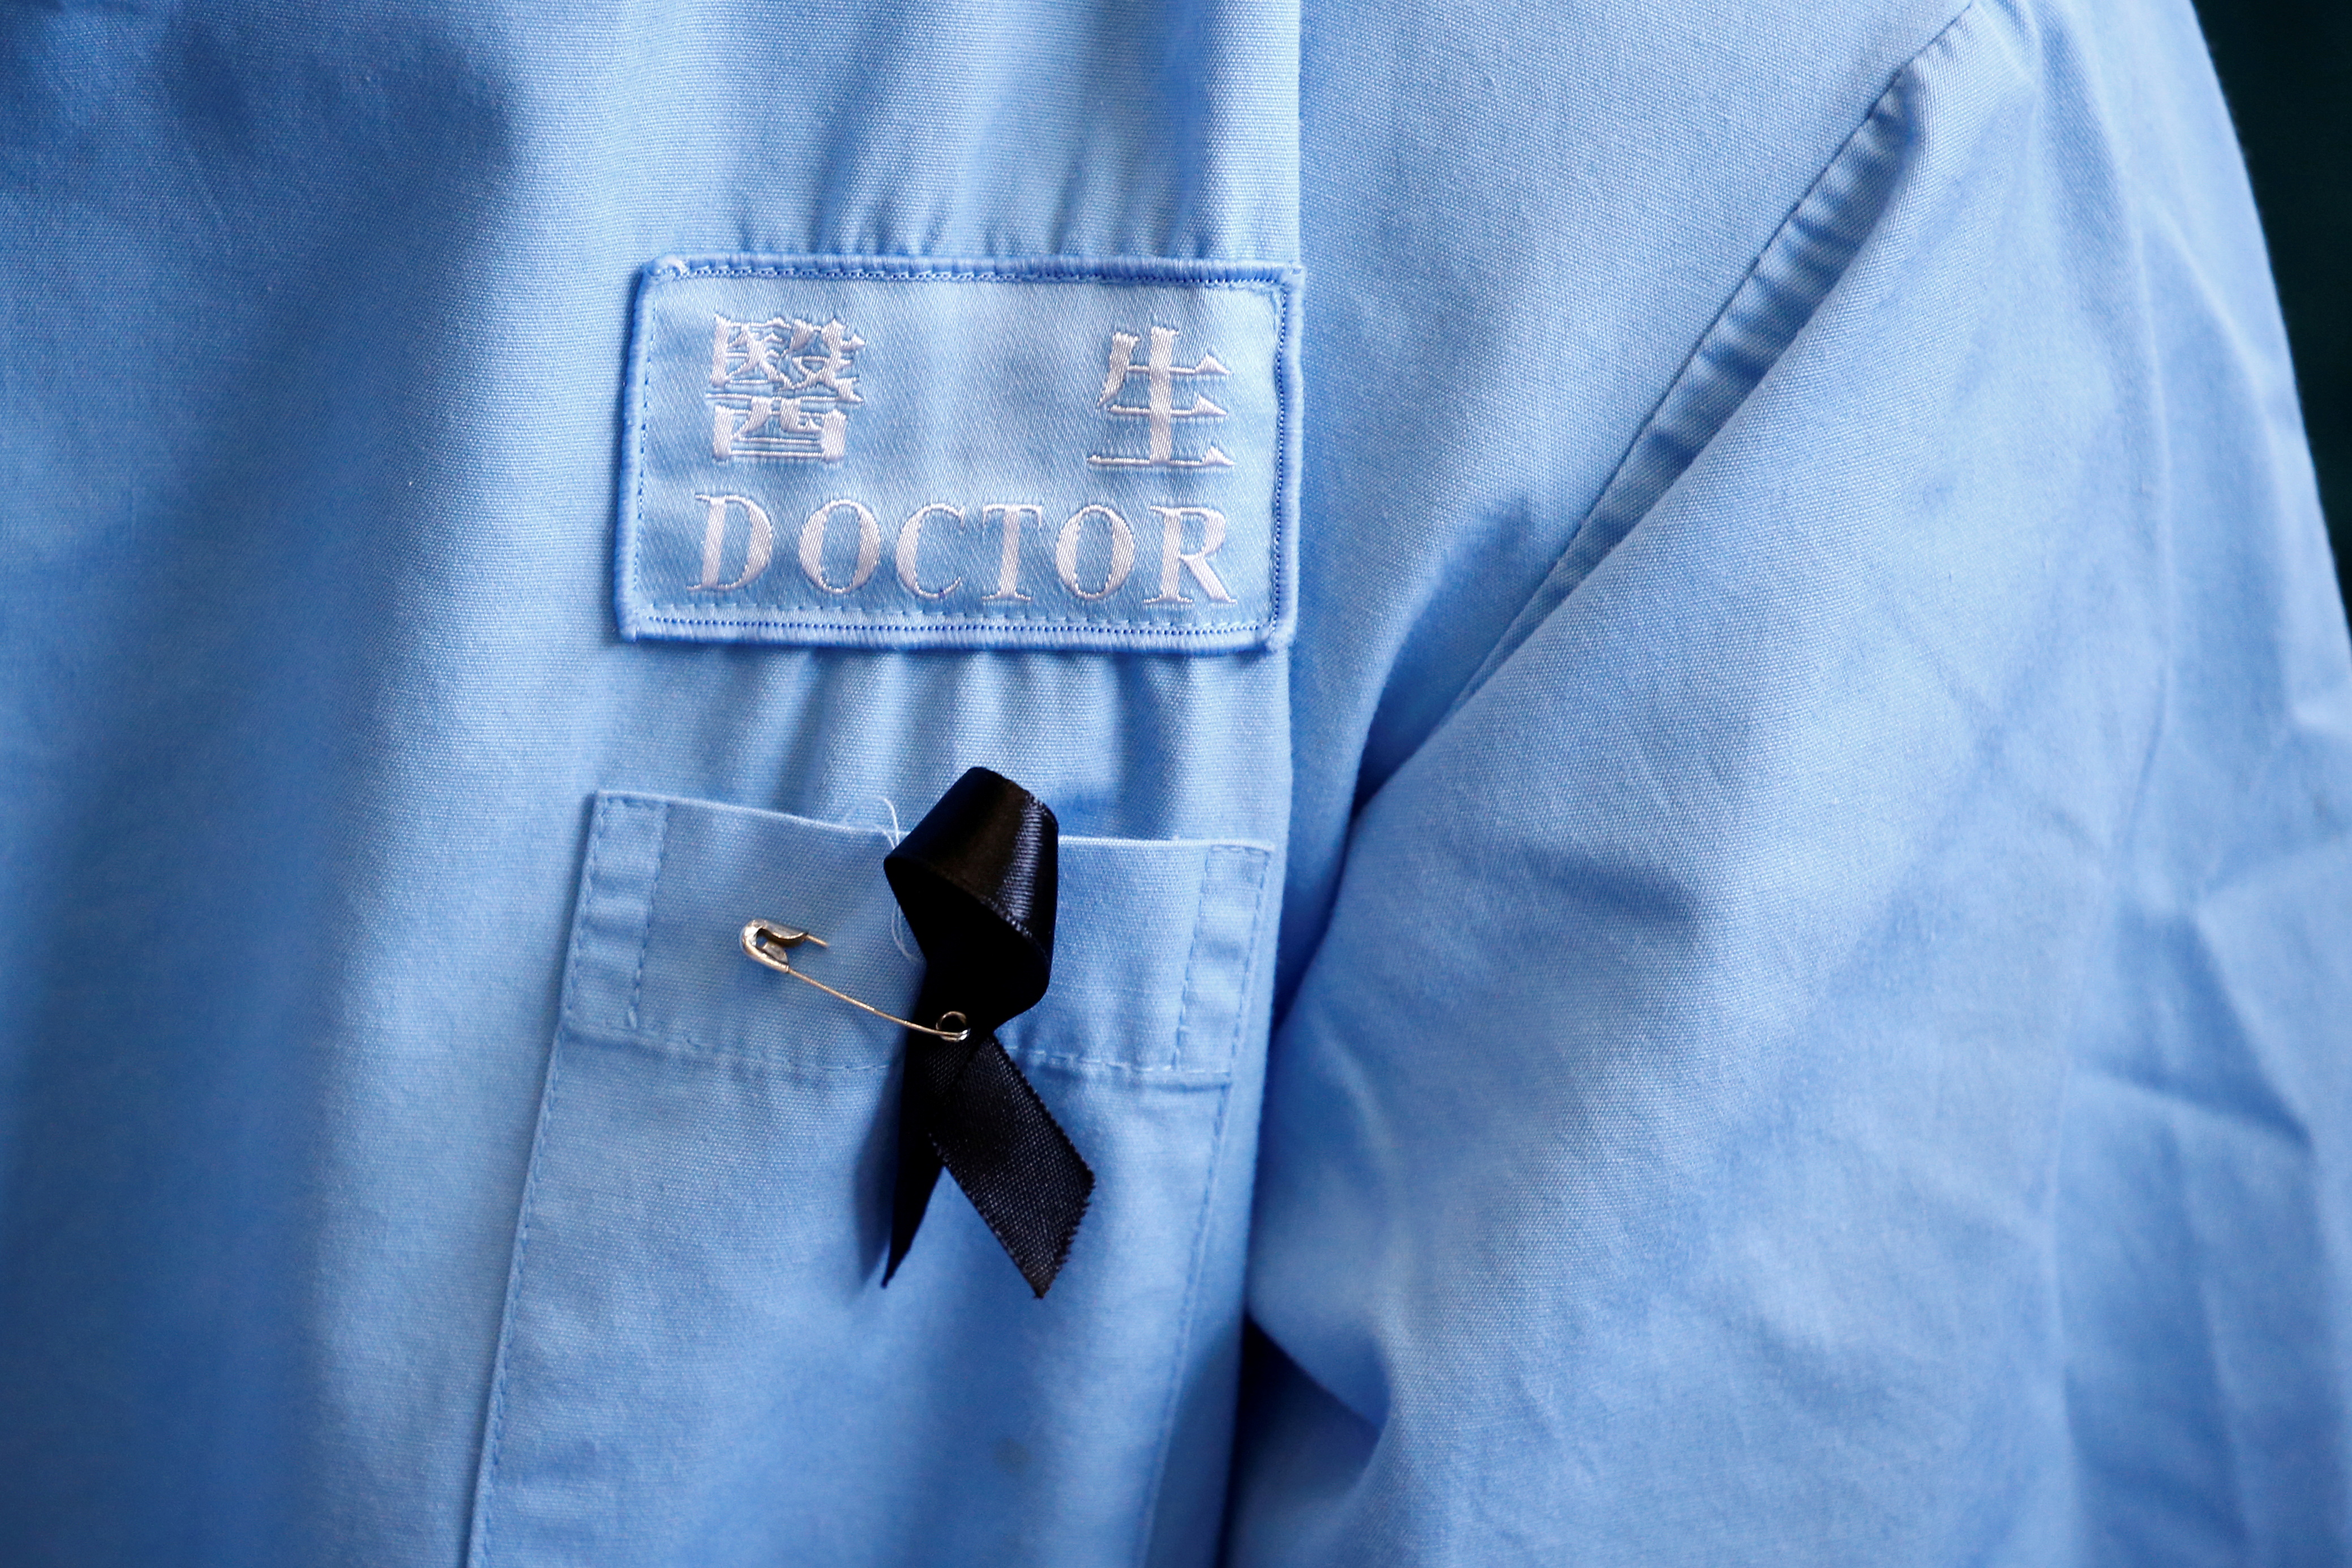 A doctor wears a protest ribbon during a picket of medical staff denouncing police brutality during anti-government protests, at Queen Elizabeth Hospital in Hong Kong, China August 13, 2019. REUTERS/Thomas Peter/File Photo